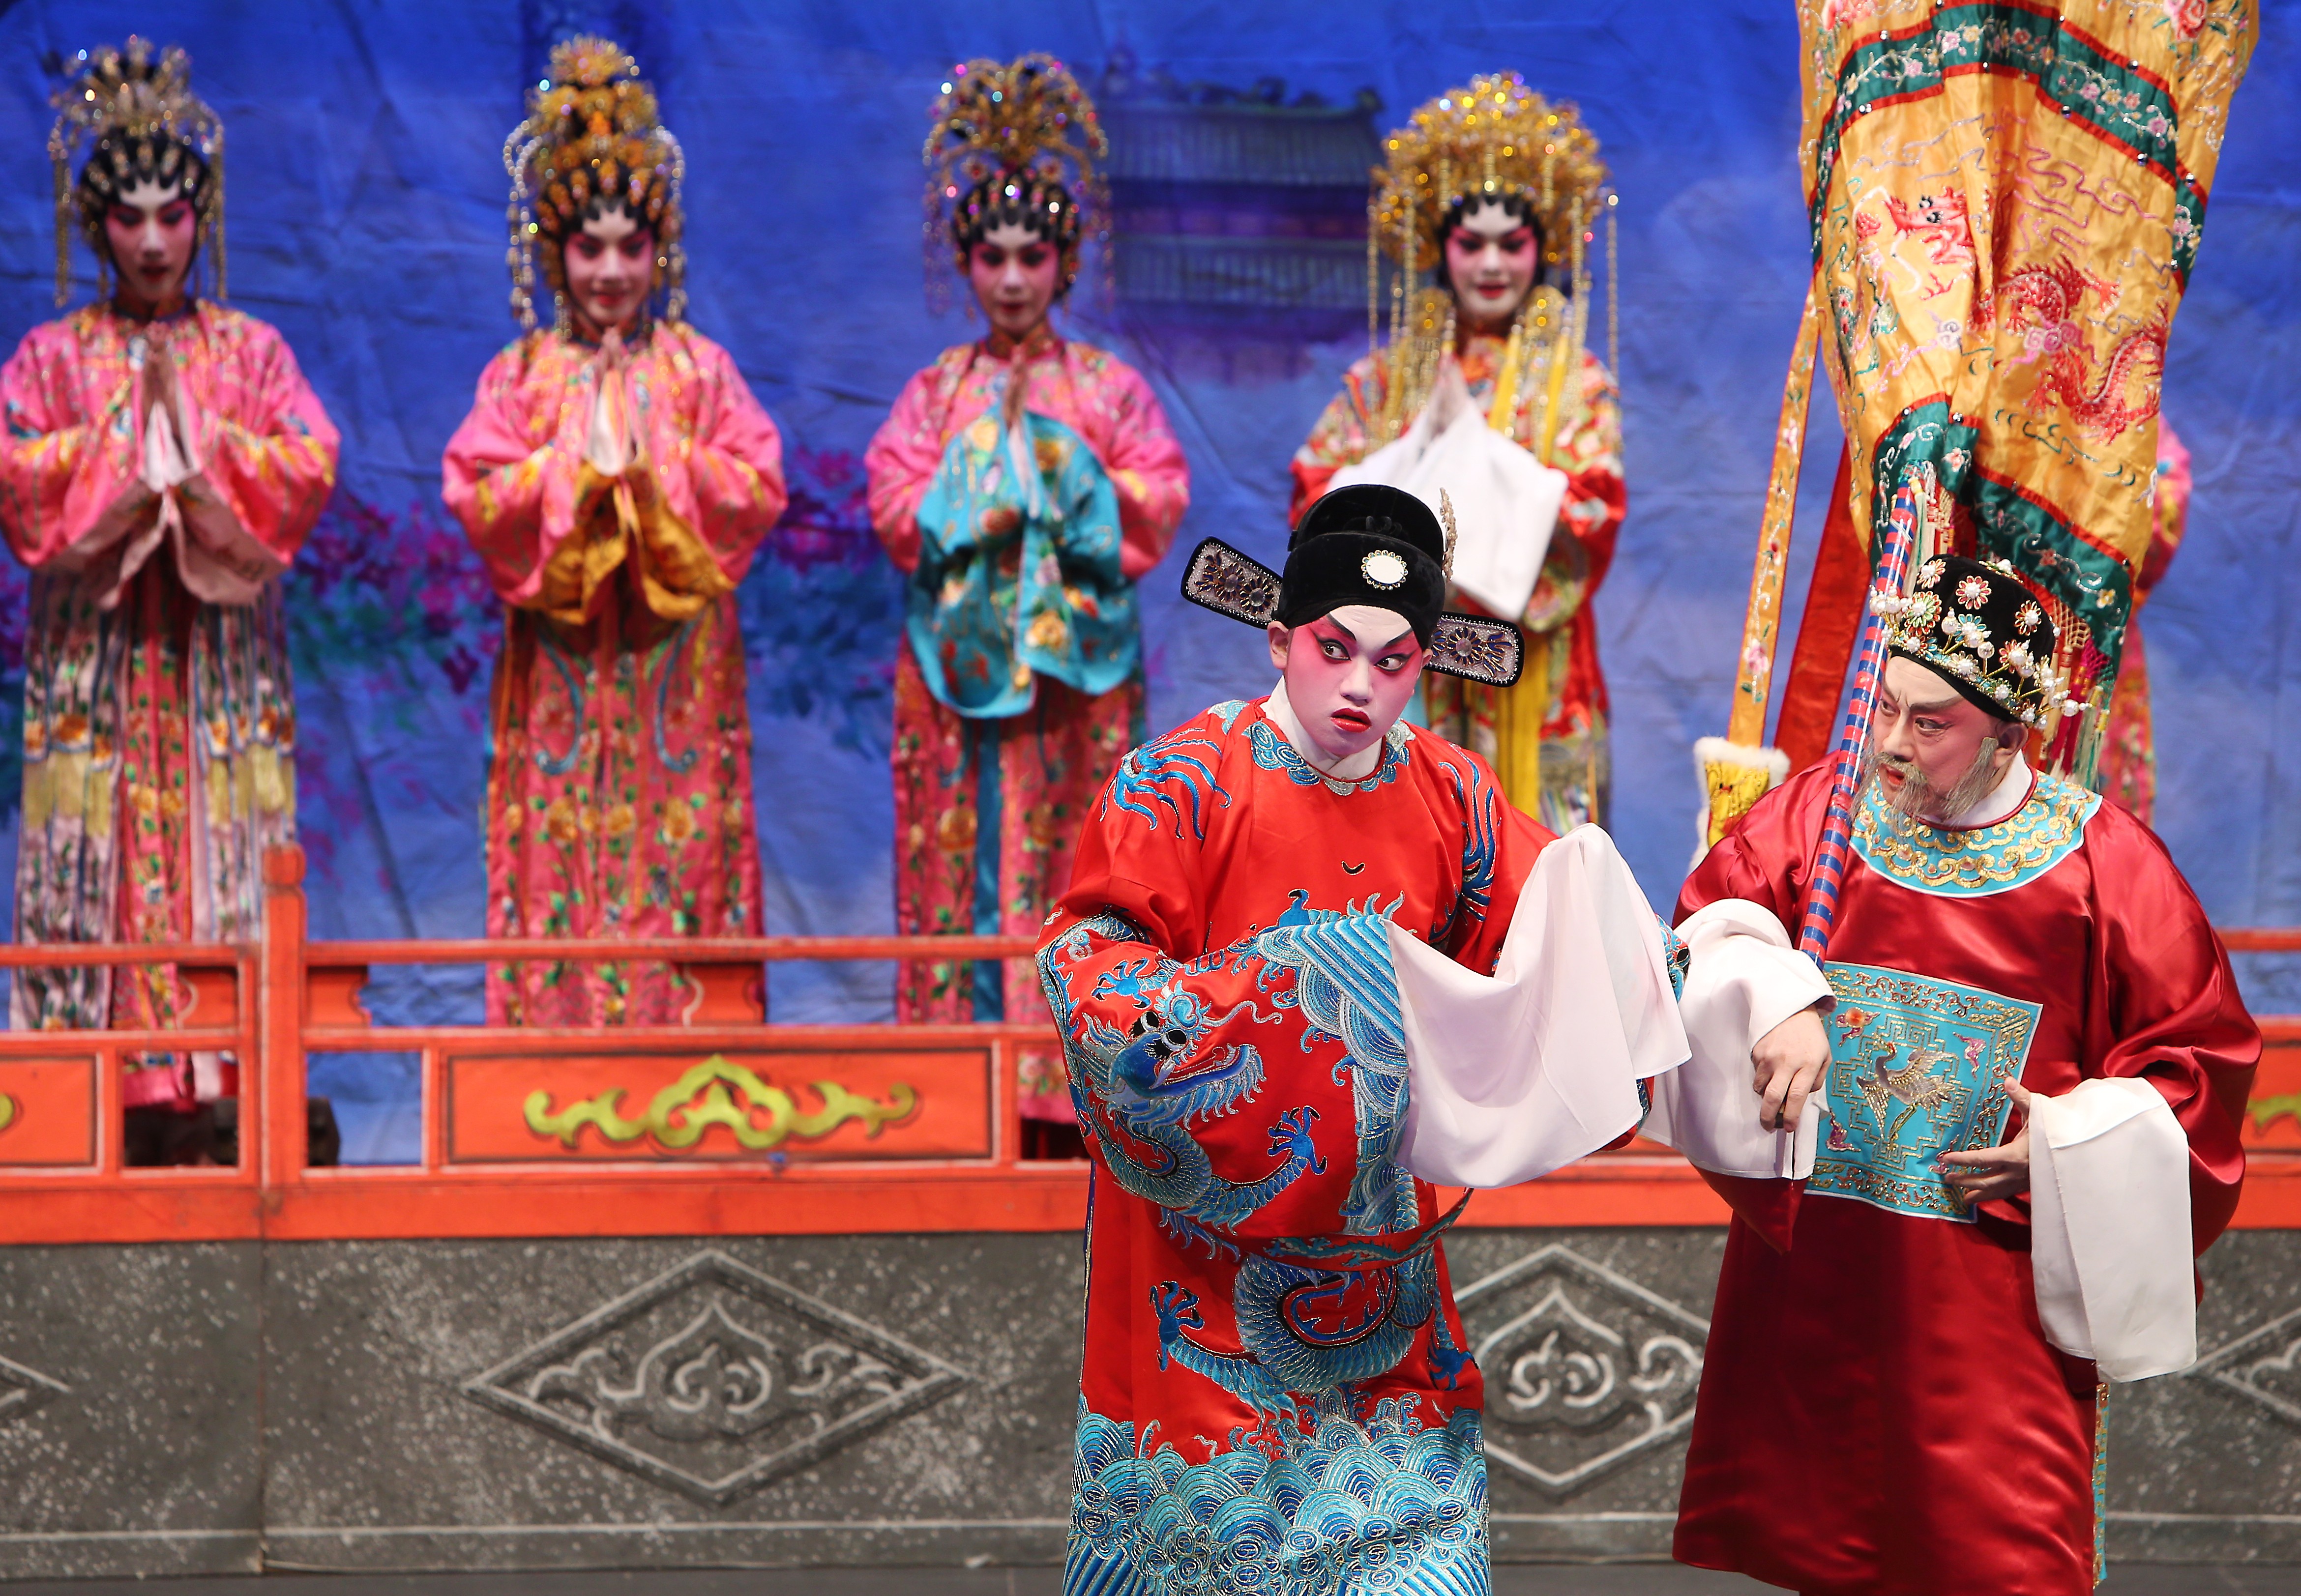 A Hong Kong Chinese person with in-depth knowledge of Cantonese opera will report to the new director of performing arts, sources say. Photo: Sam Tsang